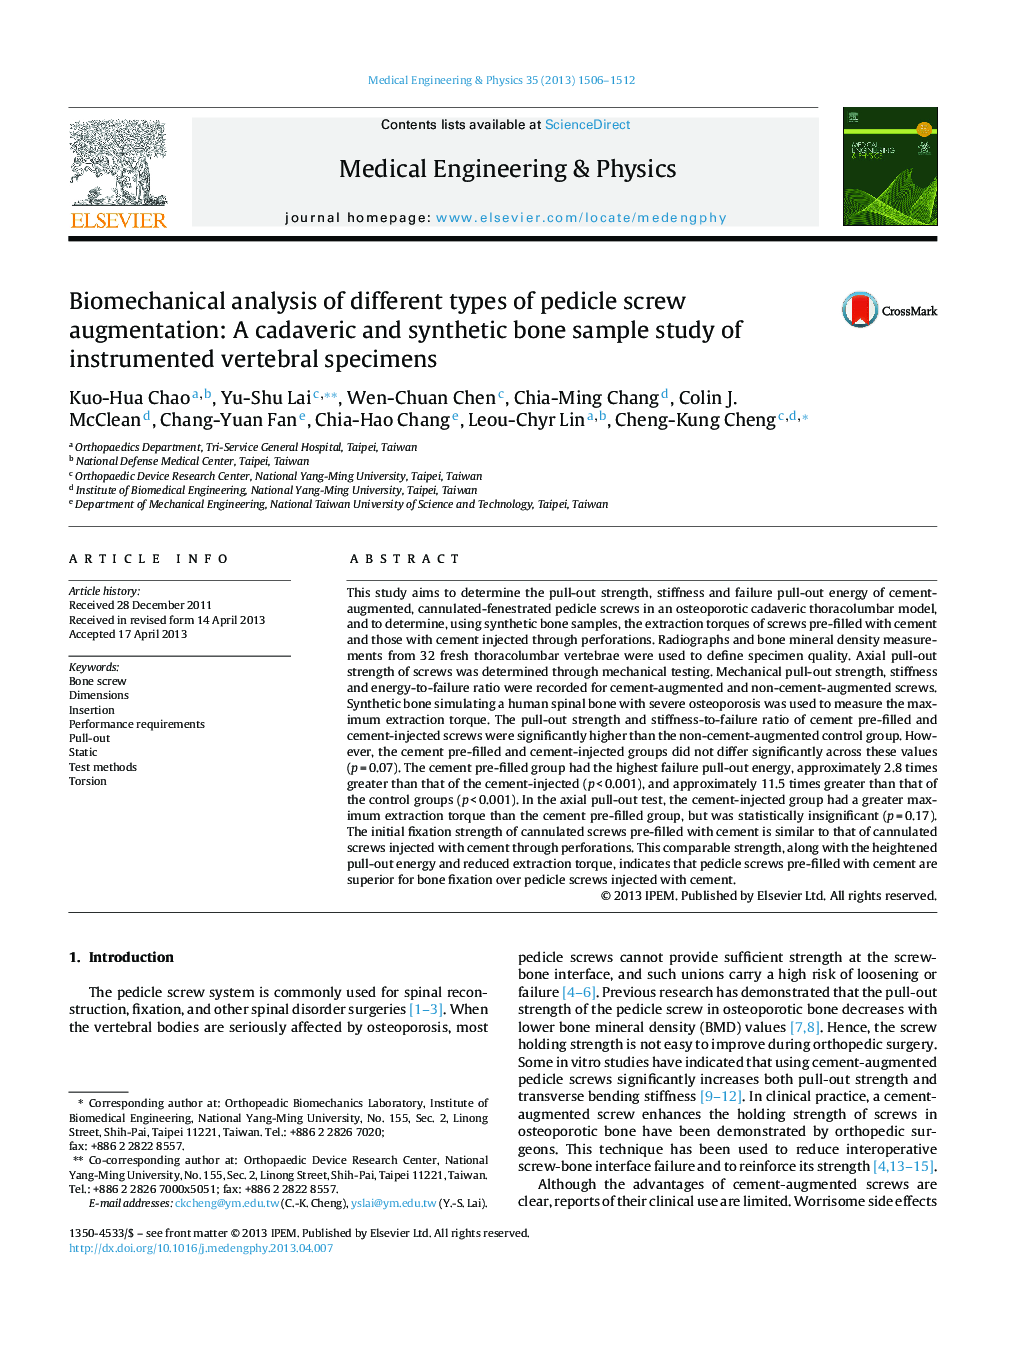 Biomechanical analysis of different types of pedicle screw augmentation: A cadaveric and synthetic bone sample study of instrumented vertebral specimens